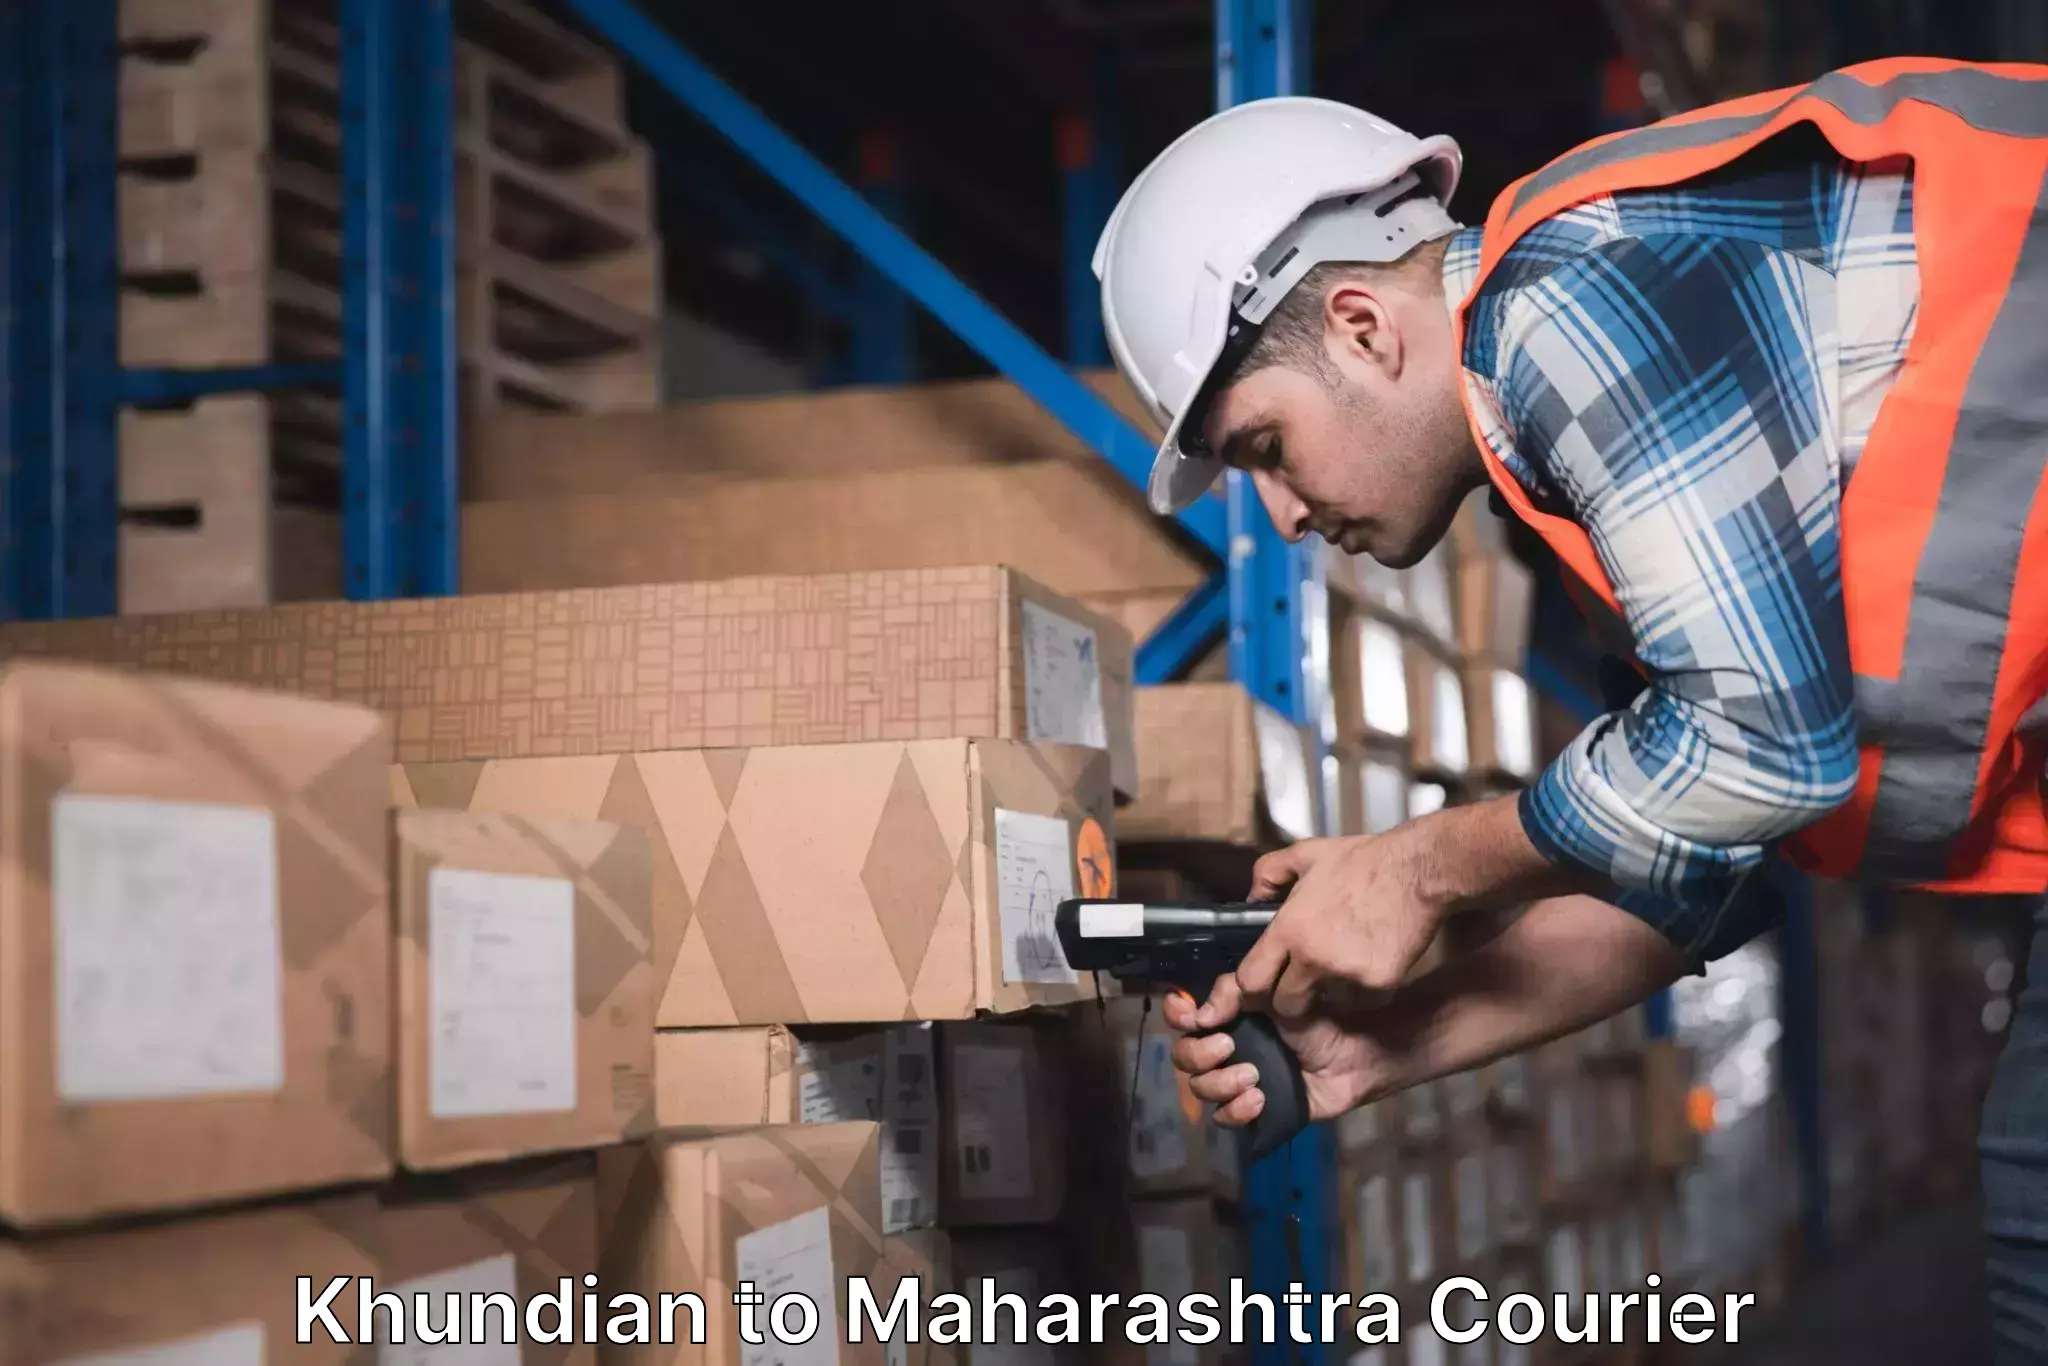 Reliable delivery network Khundian to Maharashtra